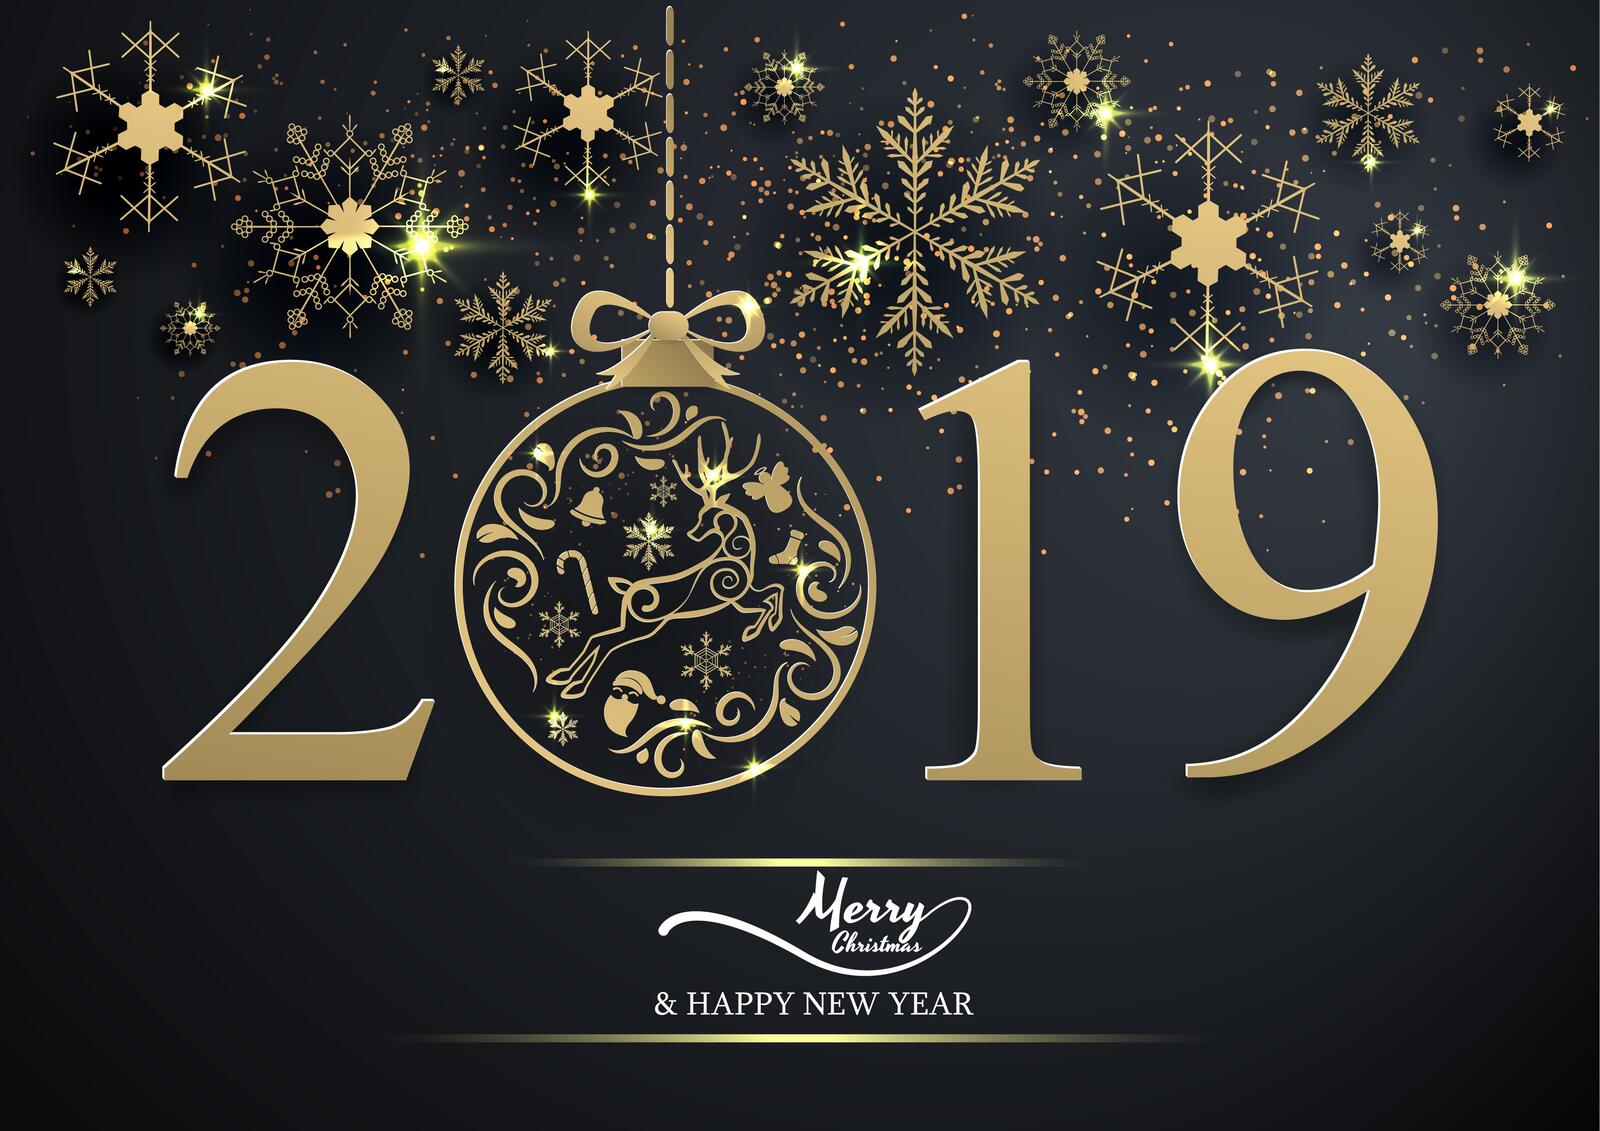 Wallpapers new year s date 2019 Happy New Year on the desktop